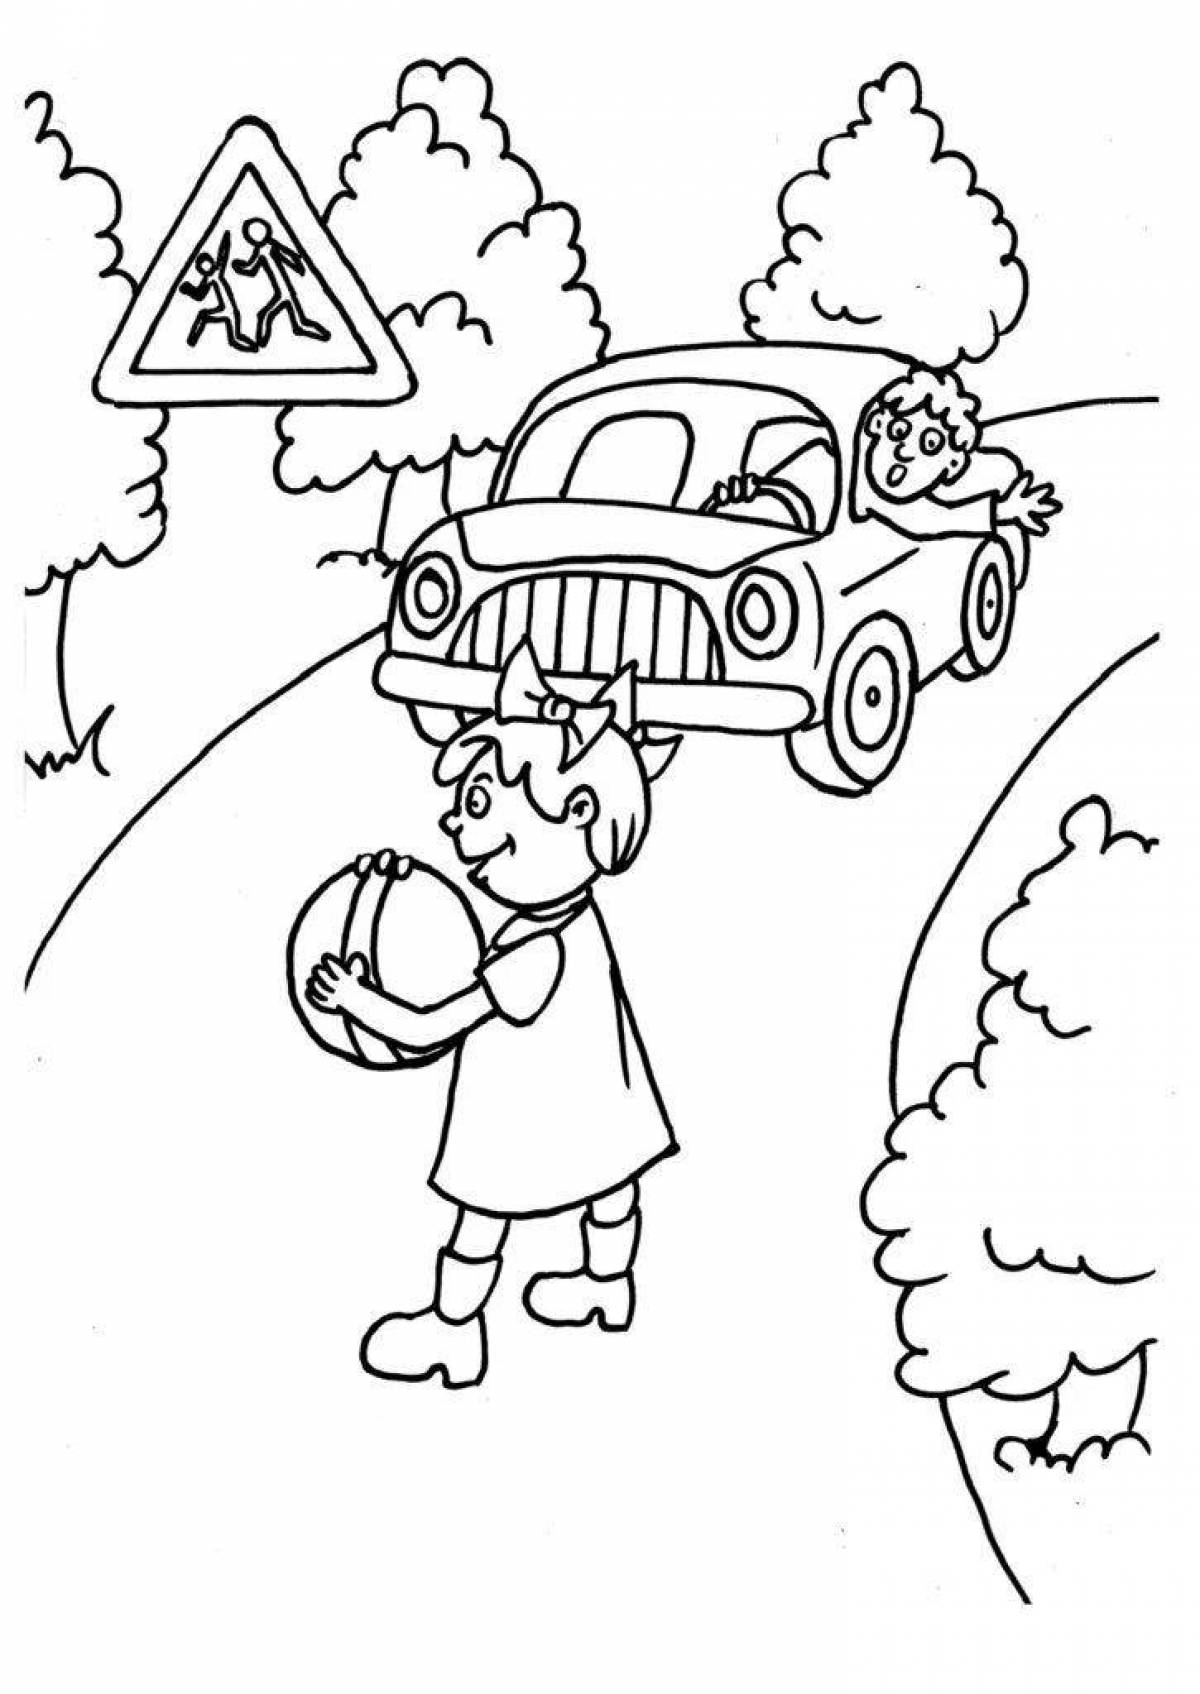 Coloring page innovative road safety